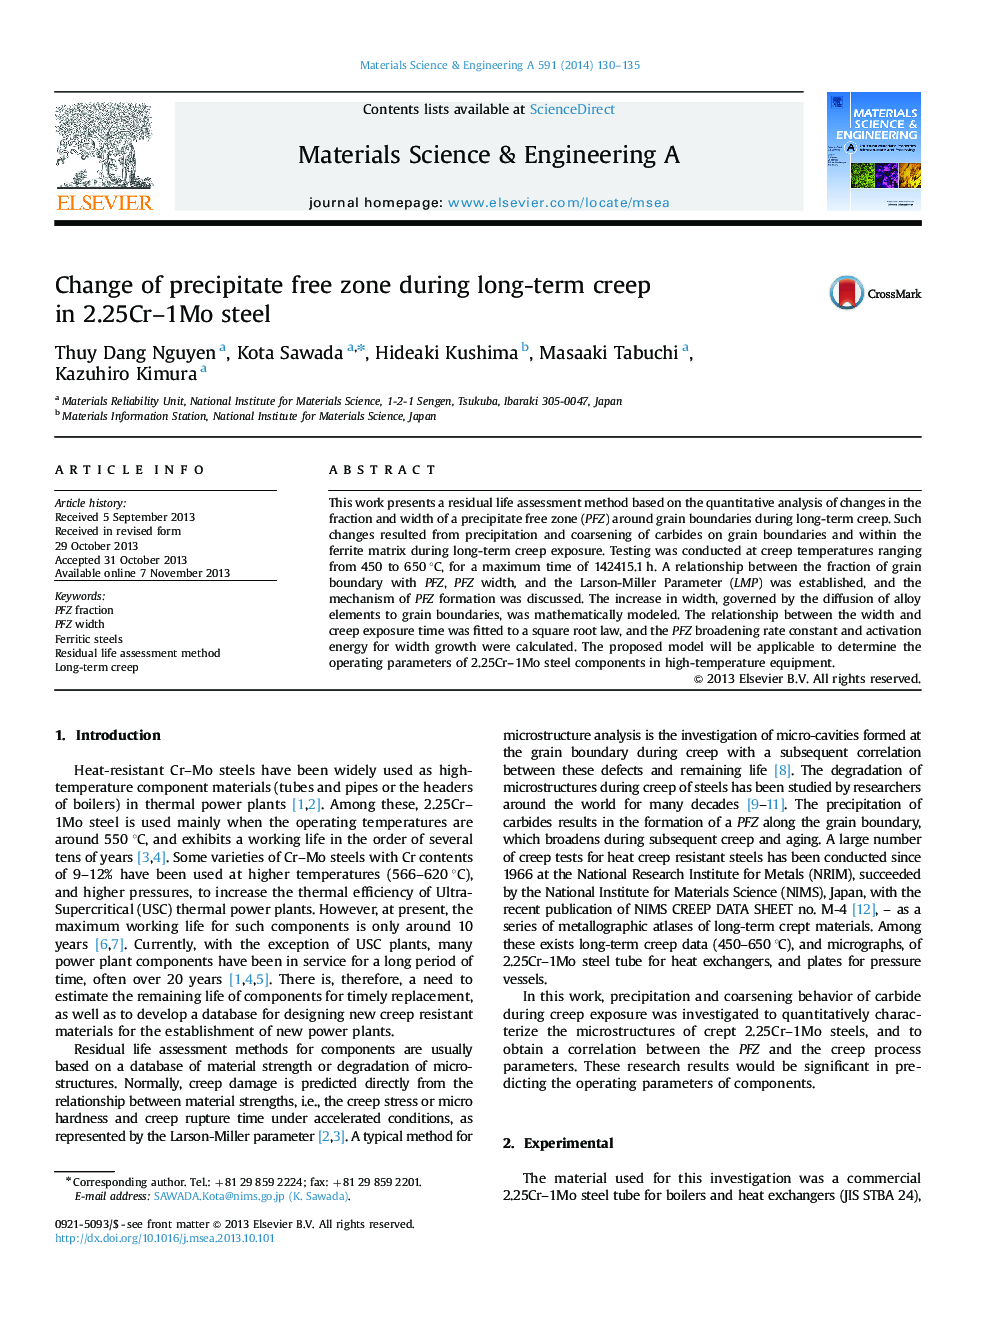 Change of precipitate free zone during long-term creep in 2.25Cr-1Mo steel